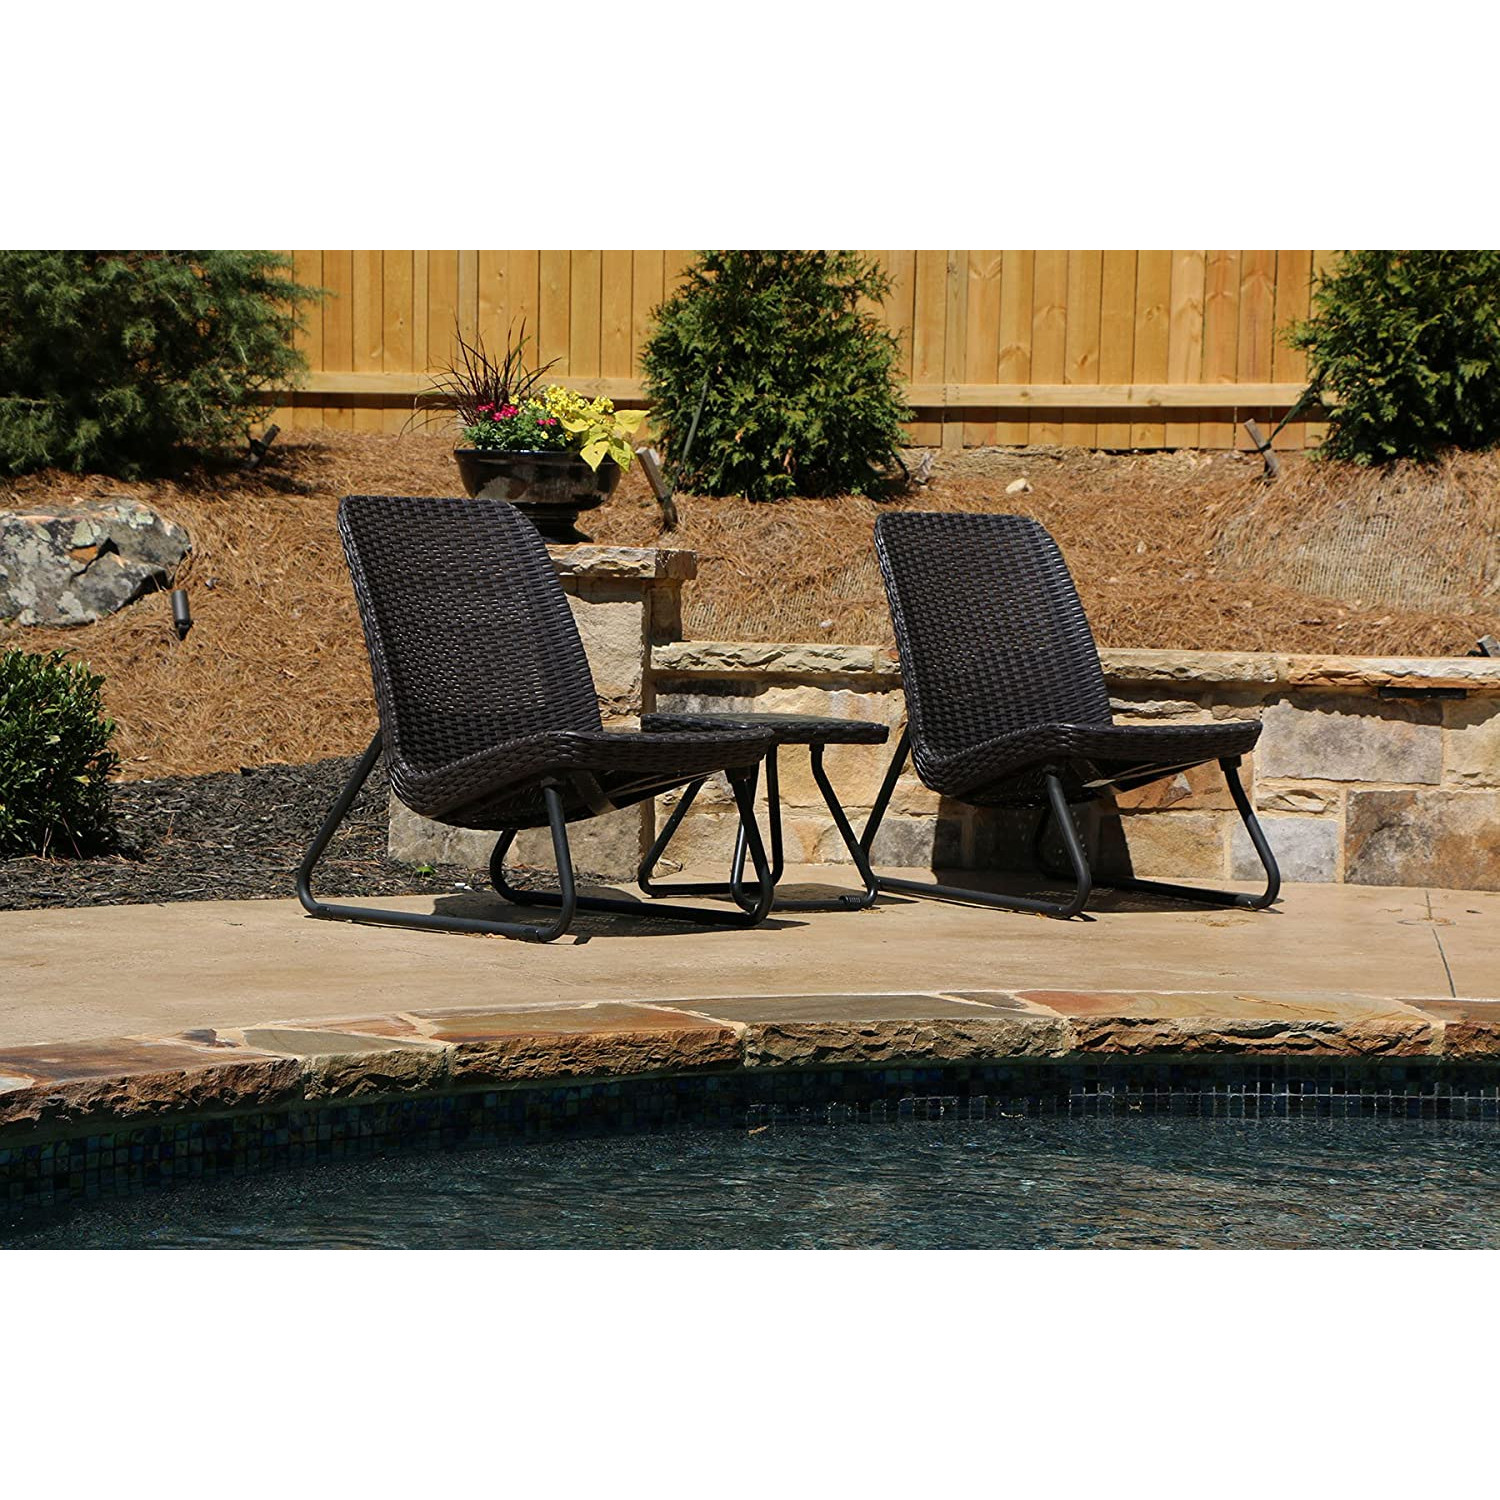 Garden Furniture Set 2 Chairs + Coffee Table